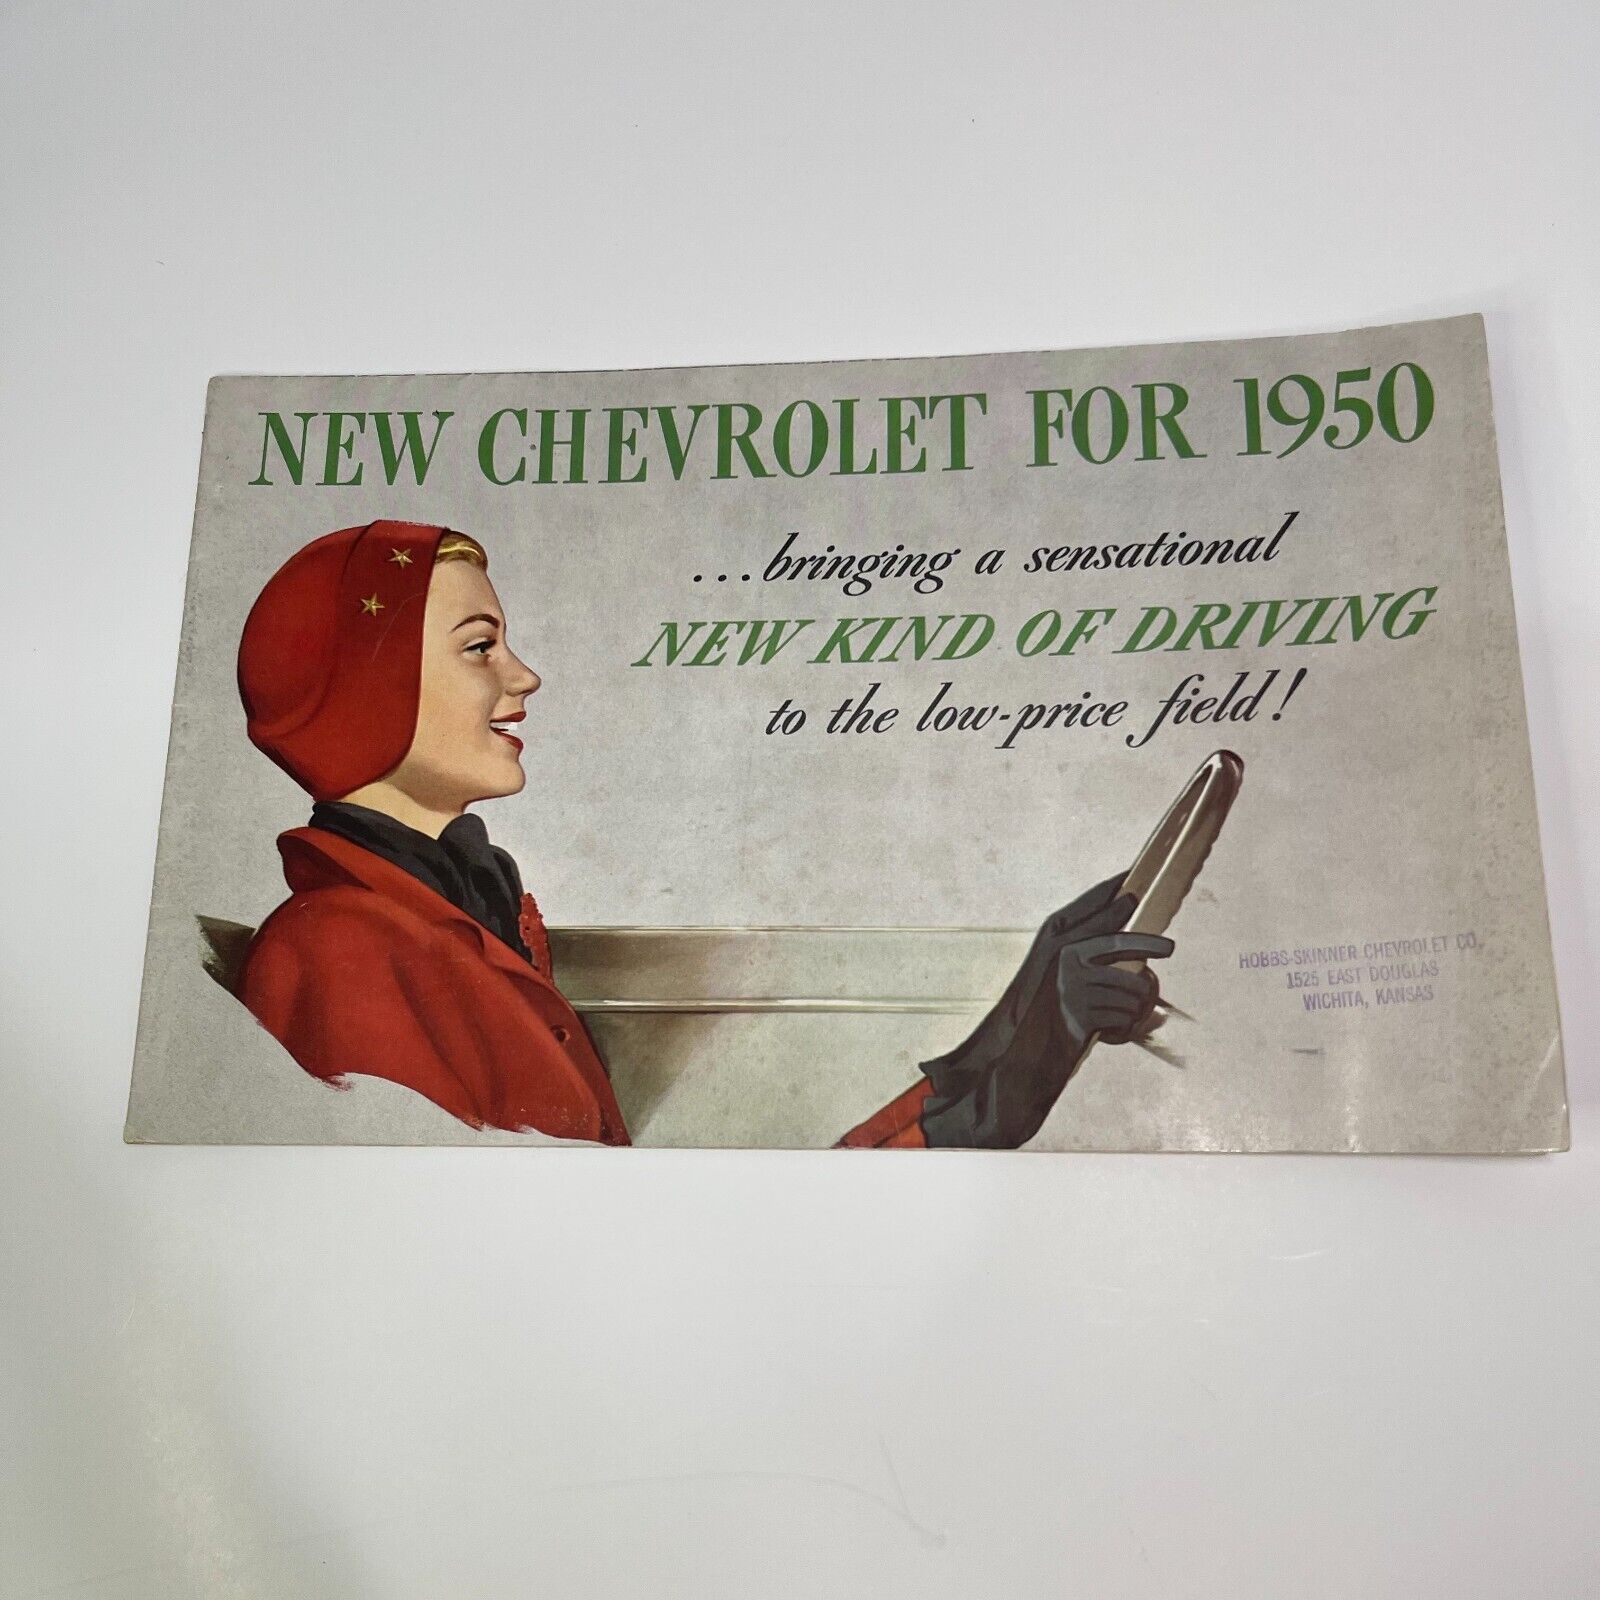 NEW CHEVROLET FOR 1950 BROCHURE Excellent condition